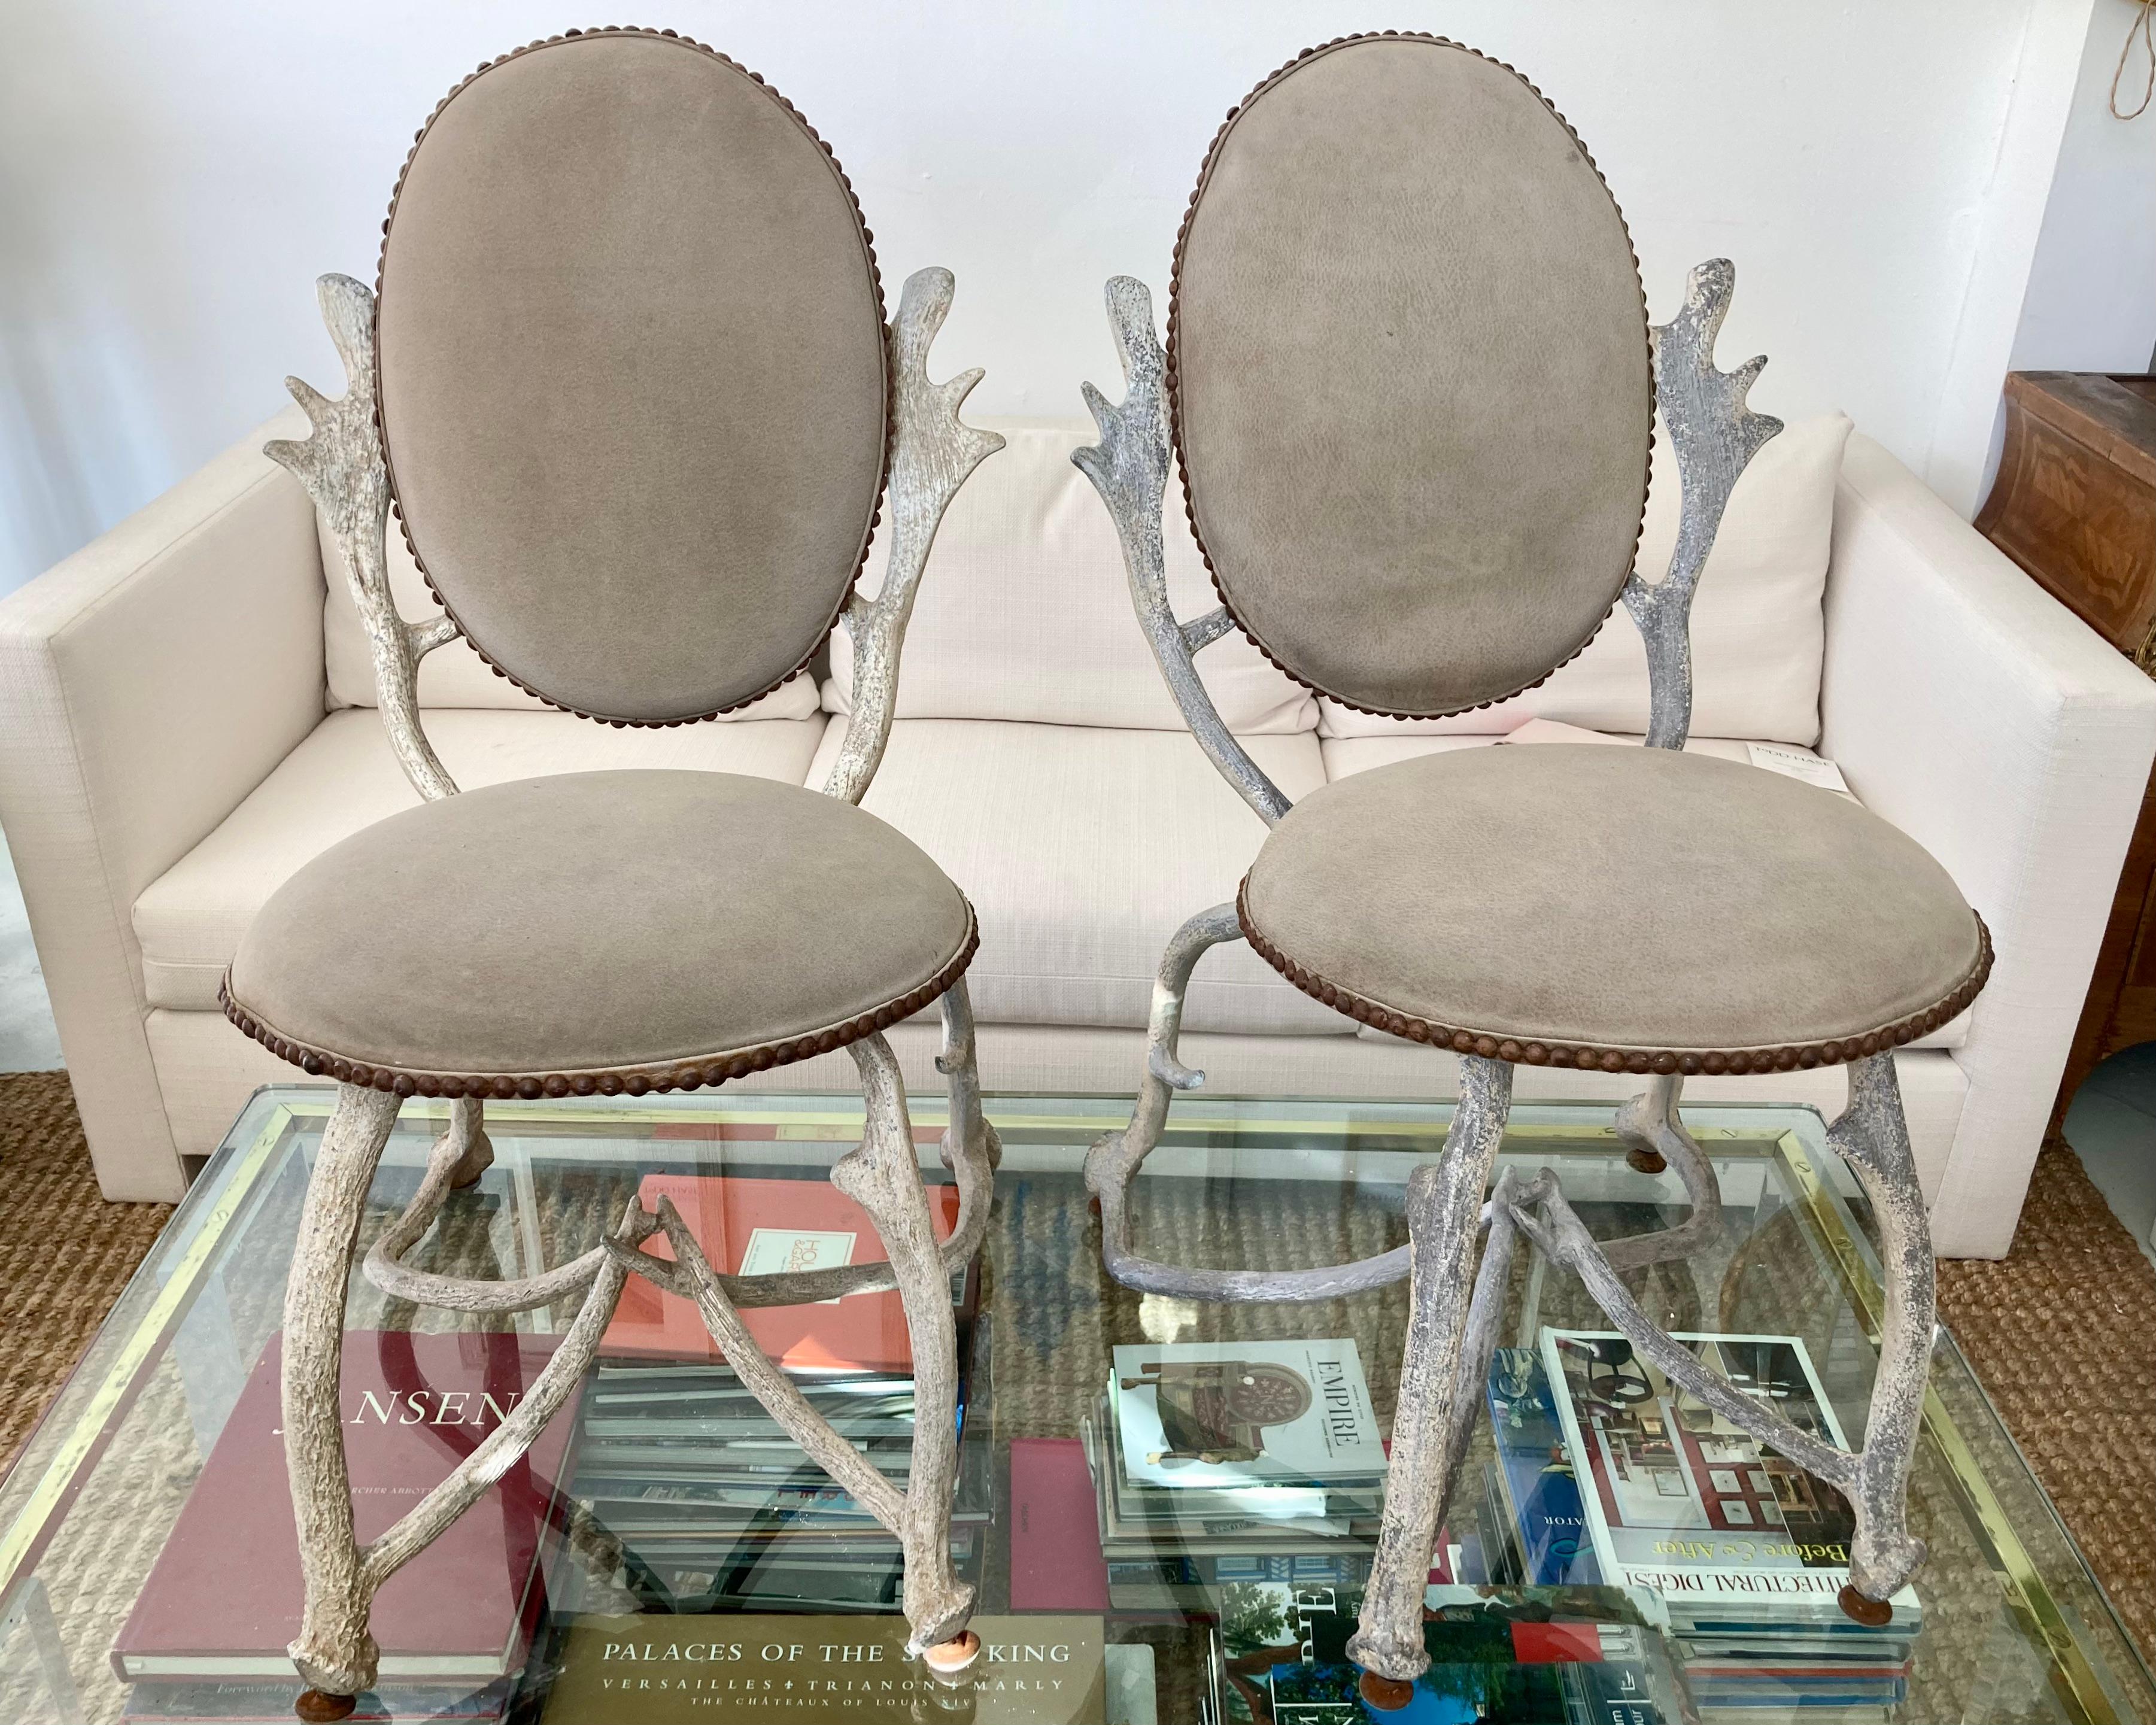 Beautiful pair of Arthur Court horn chairs. These are cast aluminum with a beautiful hand painted off-white natural finish. Gorgeous gray suede as the covering. Some wear but adds to the character.